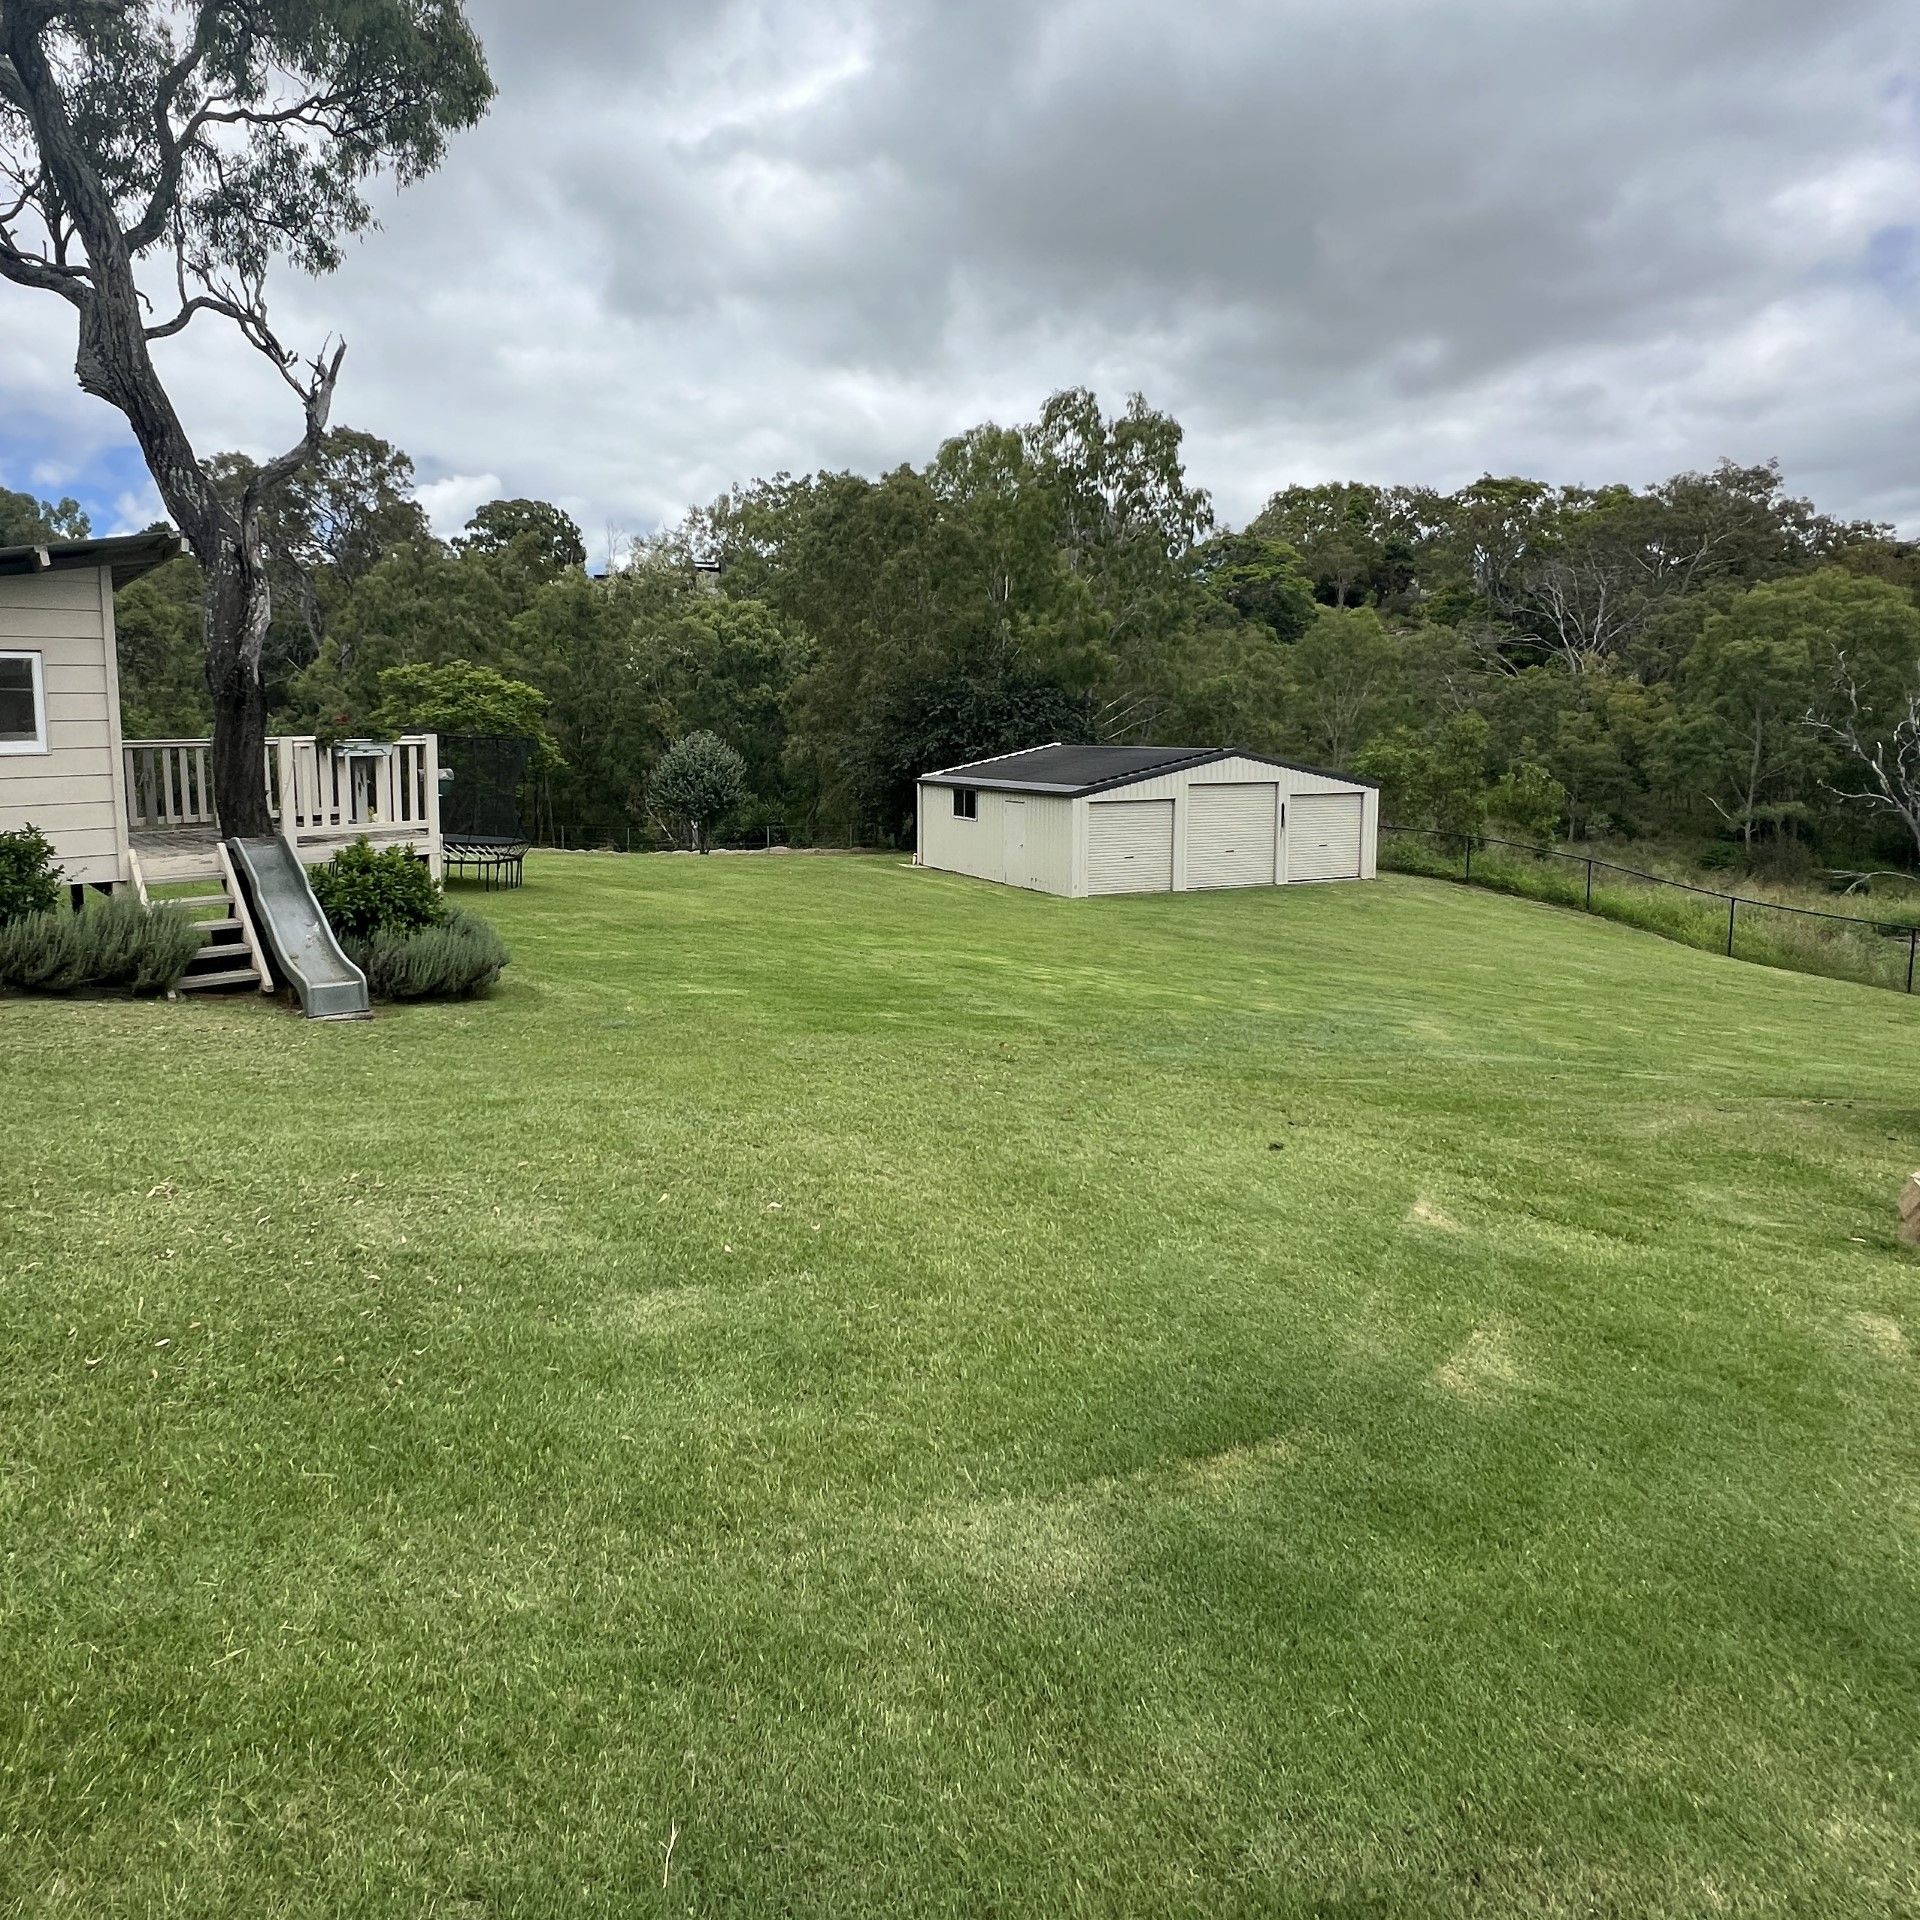 Acreage grassed property just mown